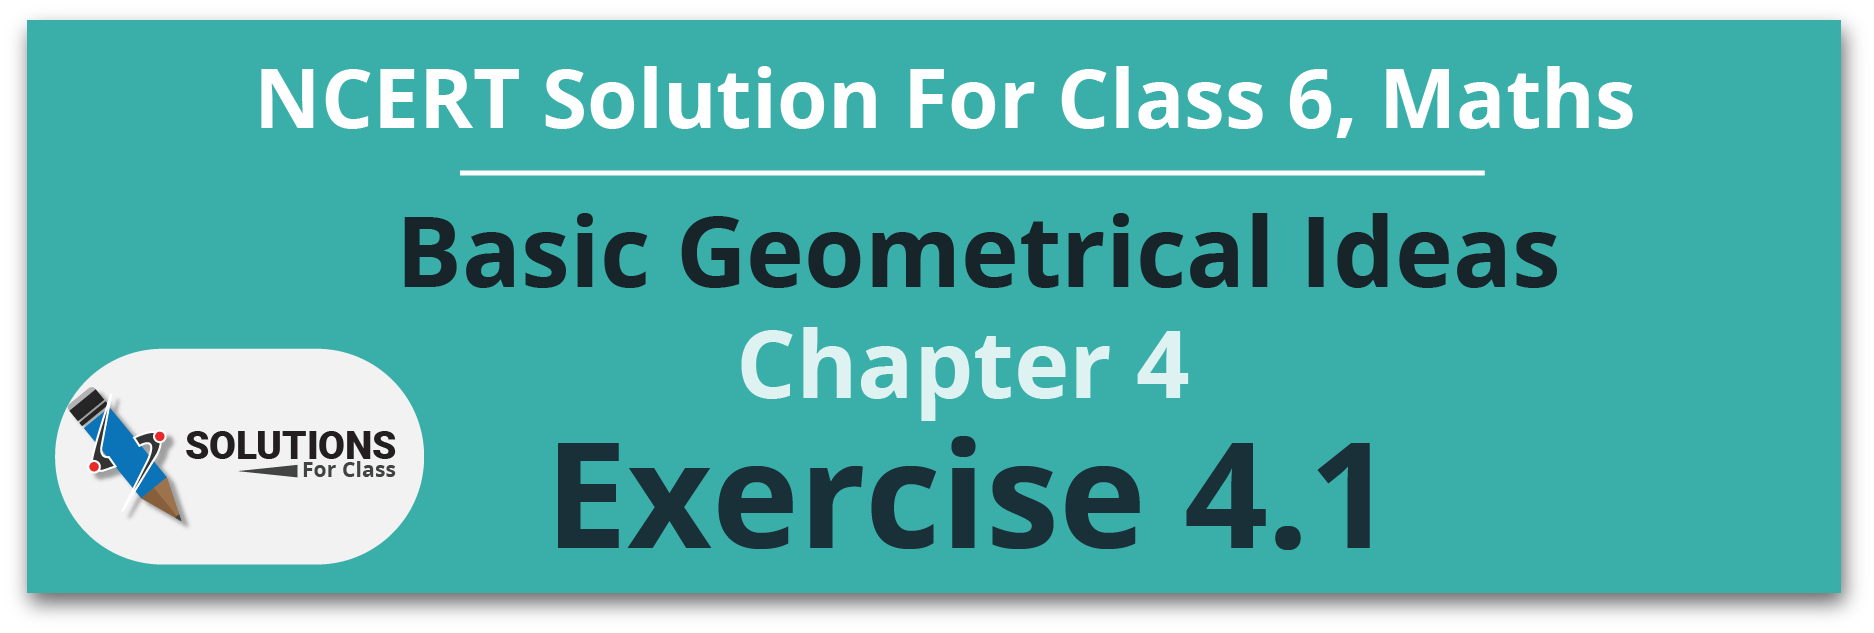 NCERT Solutions For Class 6 Maths, Chapter 4, Basic Geometrical Ideas, Exercise 4.1​